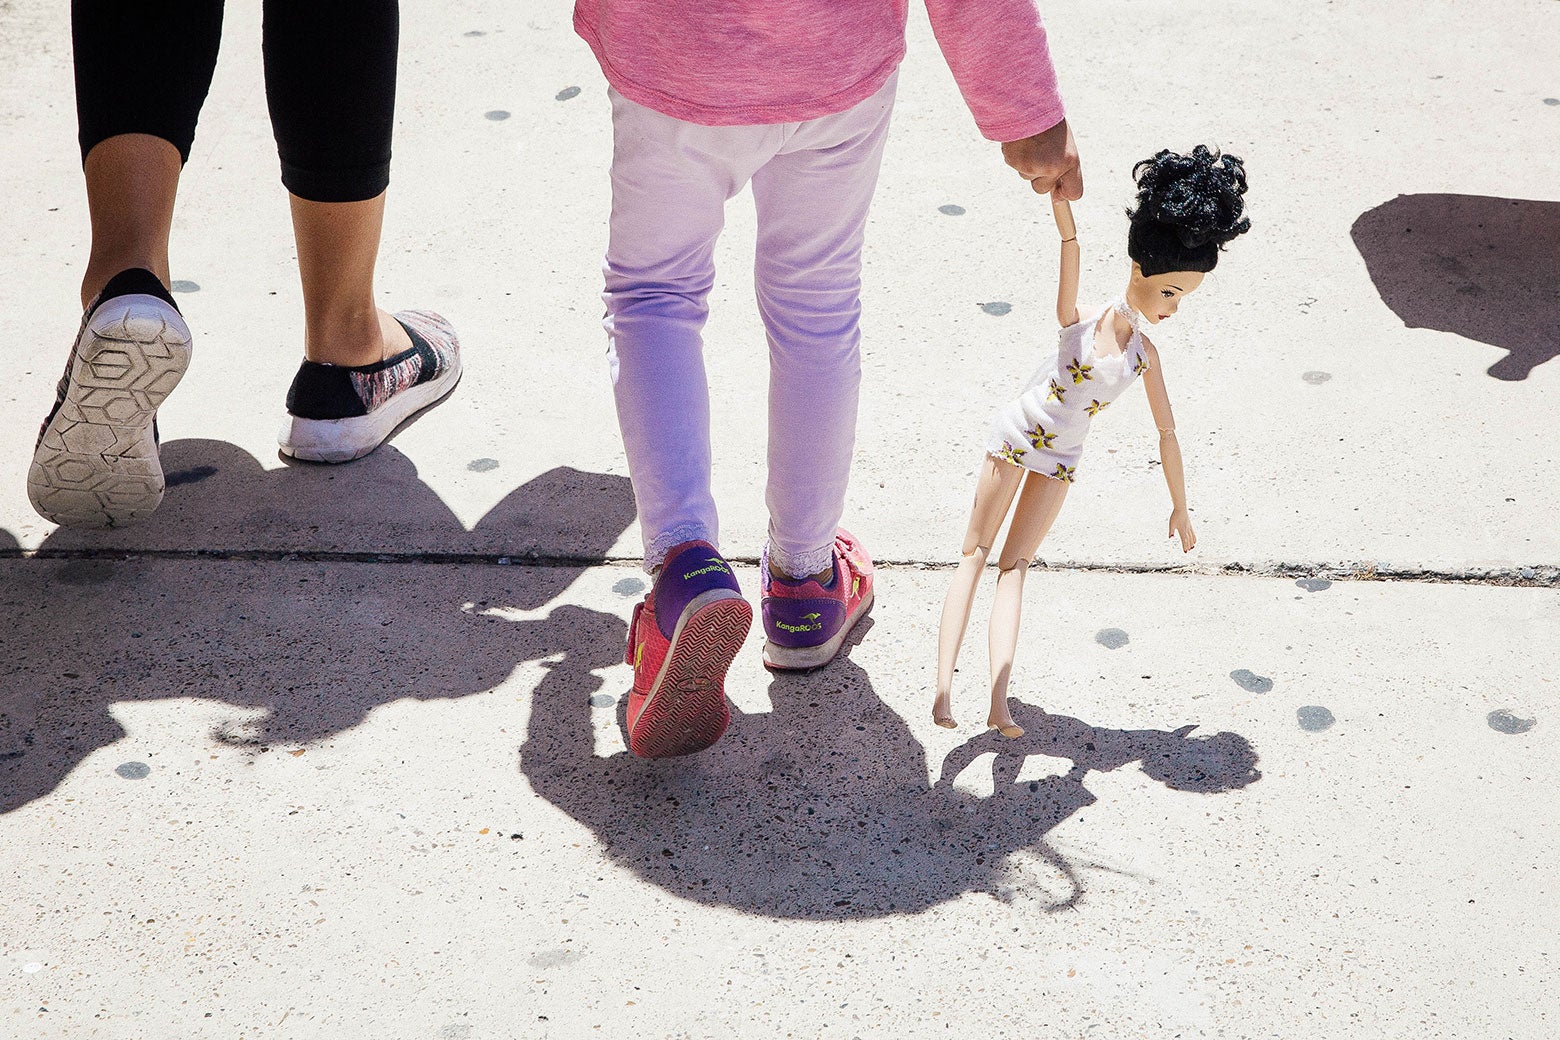 A 4-year-old Honduran girl carries a doll while walking with her immigrant mother.